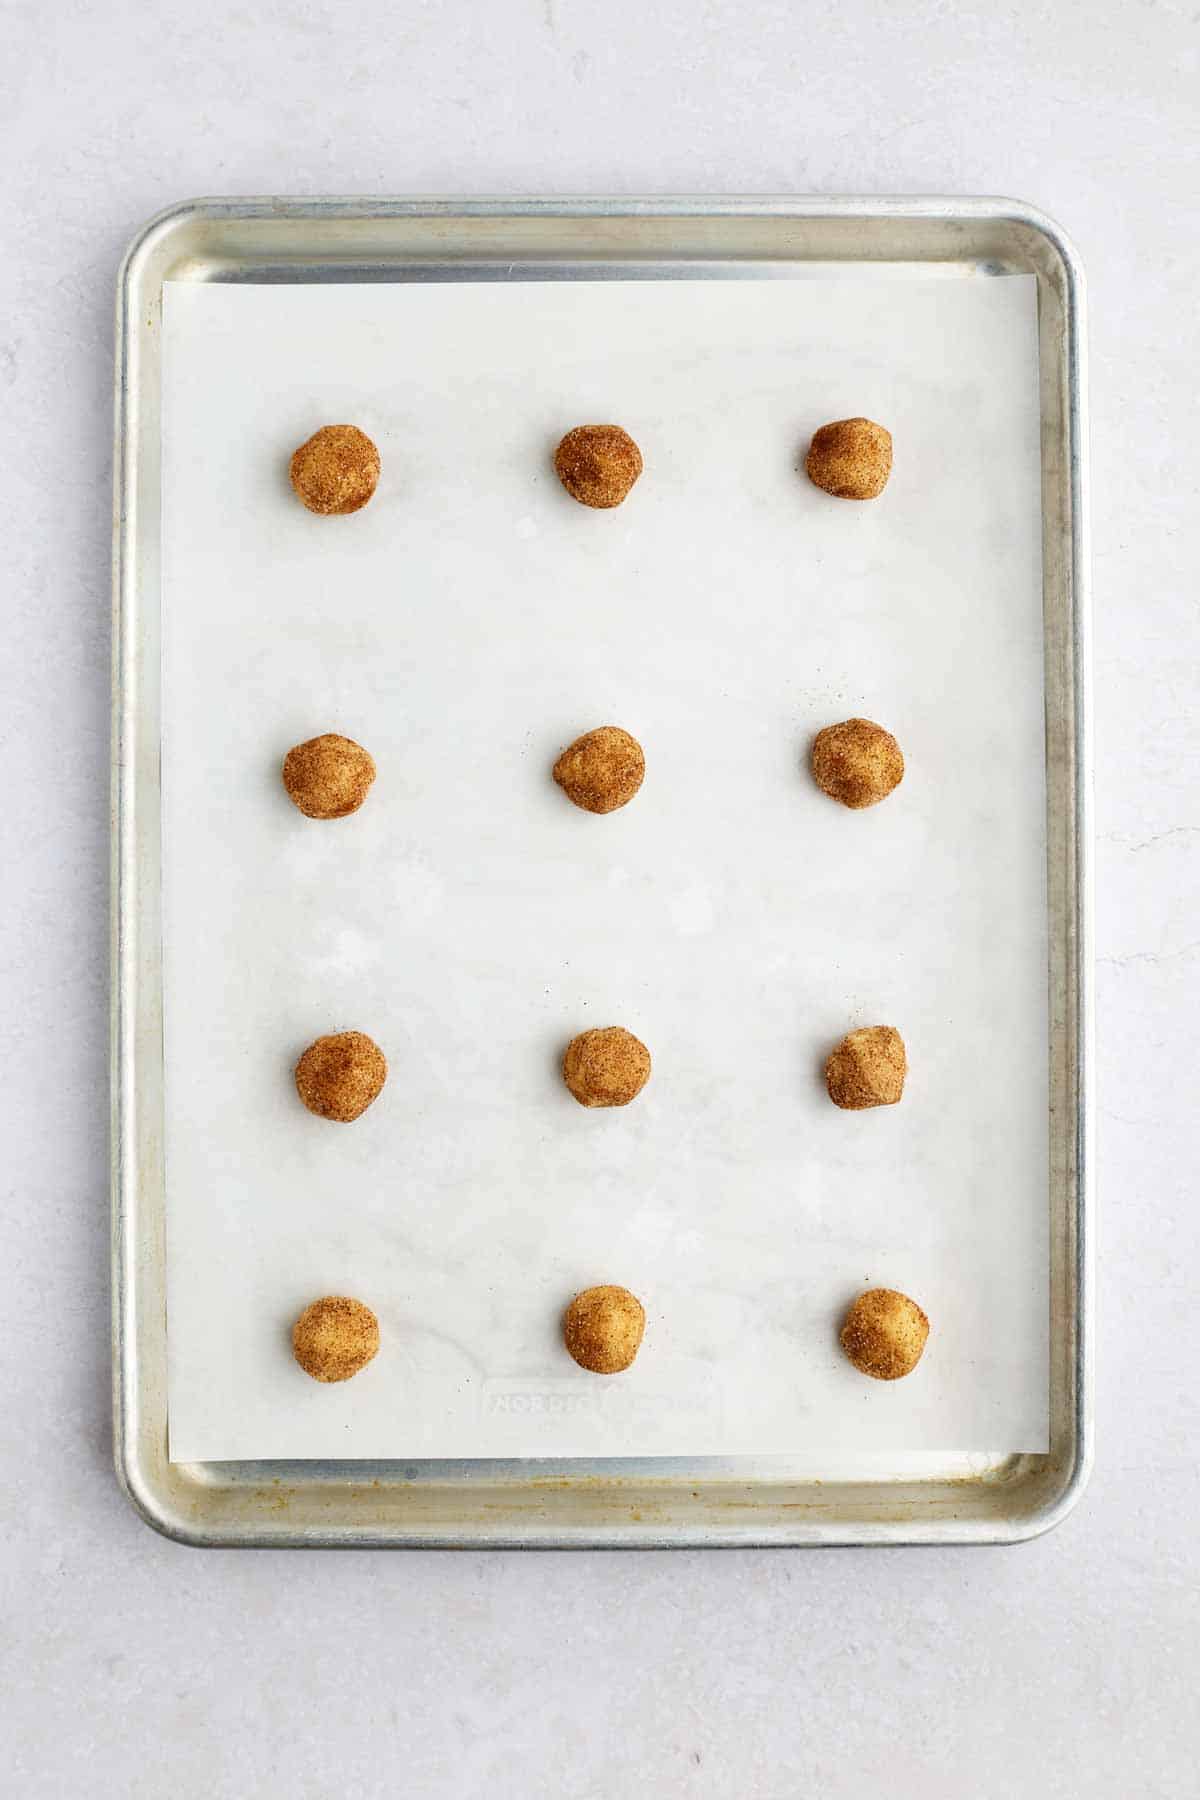 Snickerdoodle cookie dough balls on a lined baking sheet.